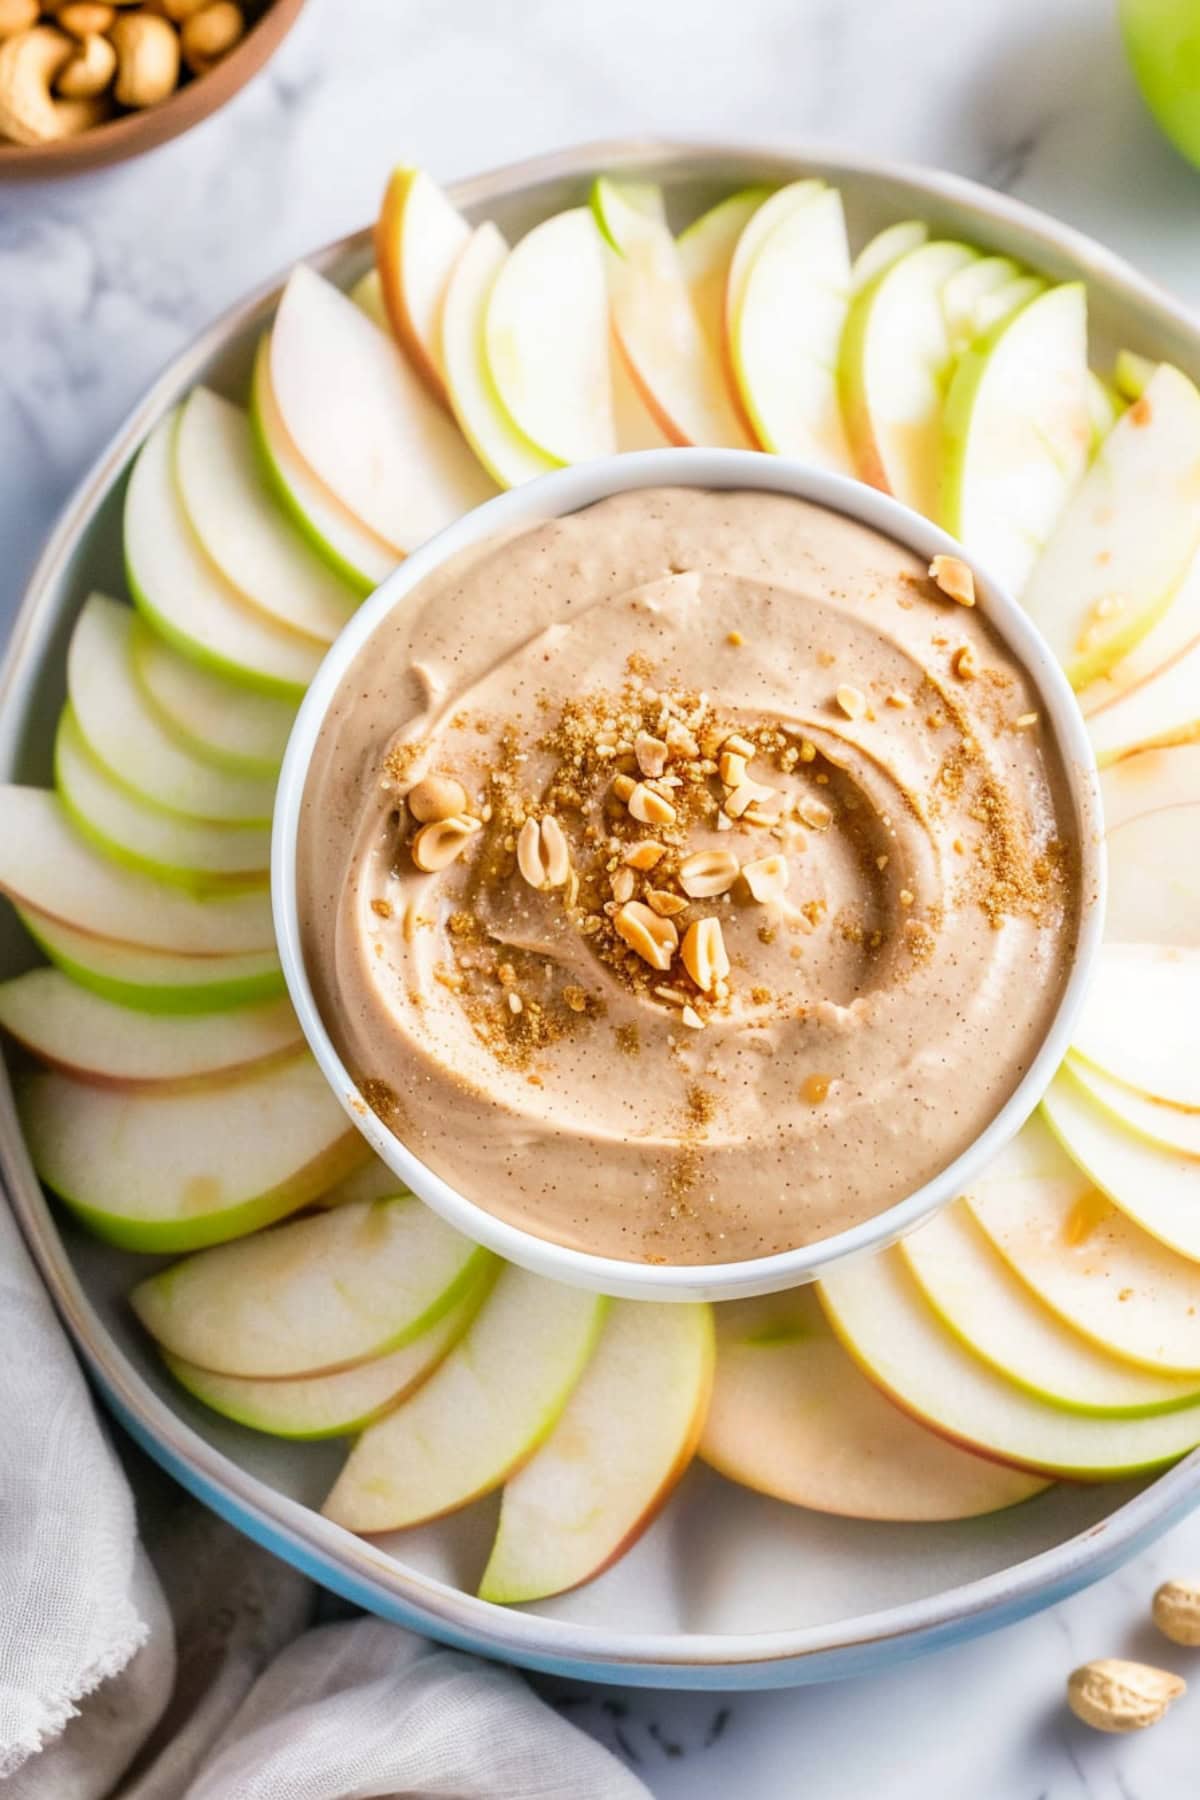 Thinly sliced green apples with creamy peanut butter dip in bowl.